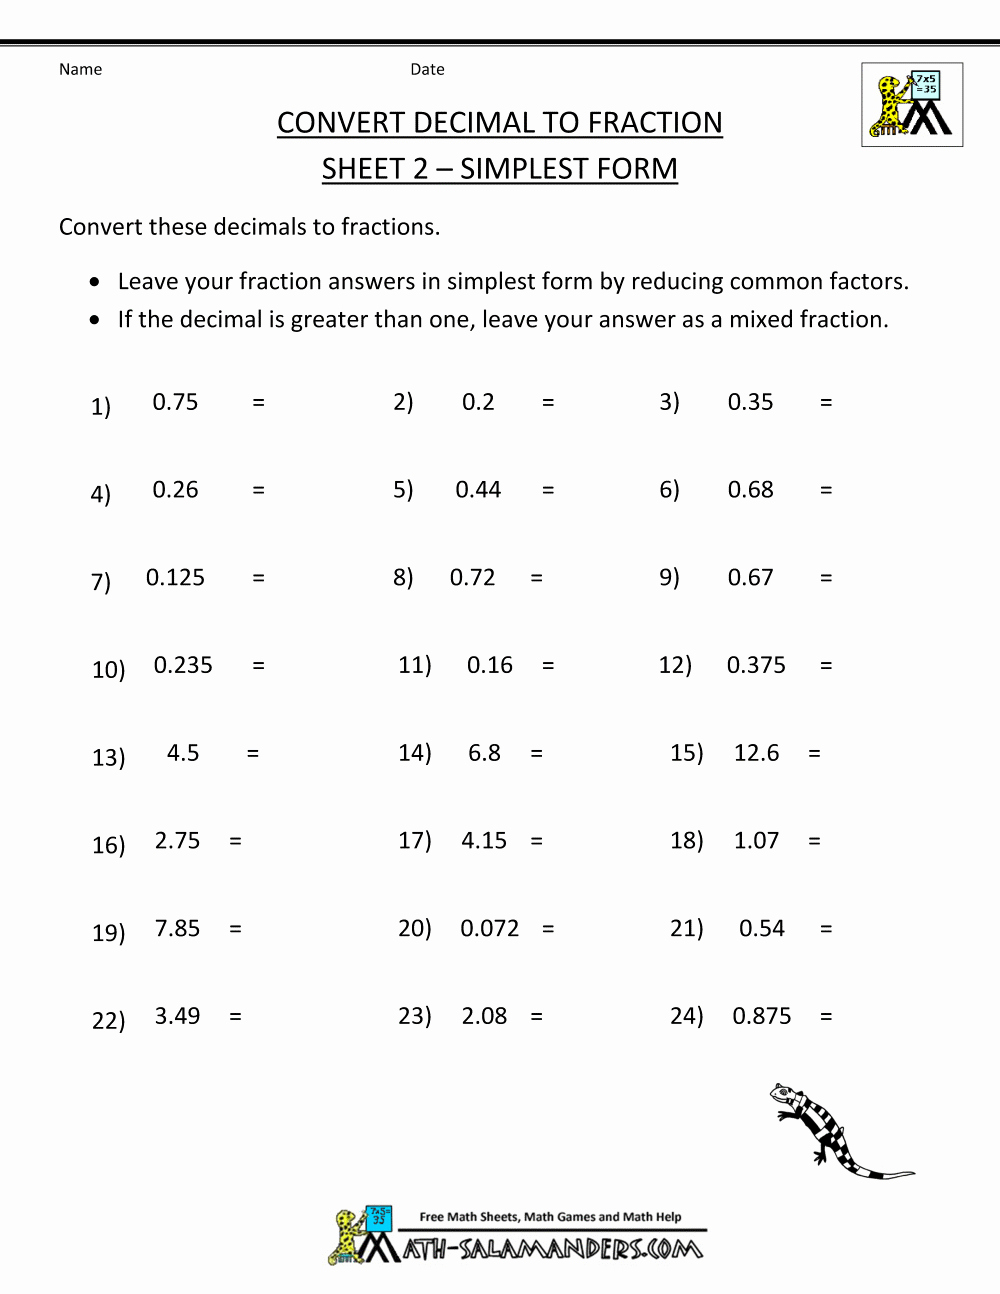 Repeating Decimals to Fractions Worksheet Best Of Convert Decimal to Fraction